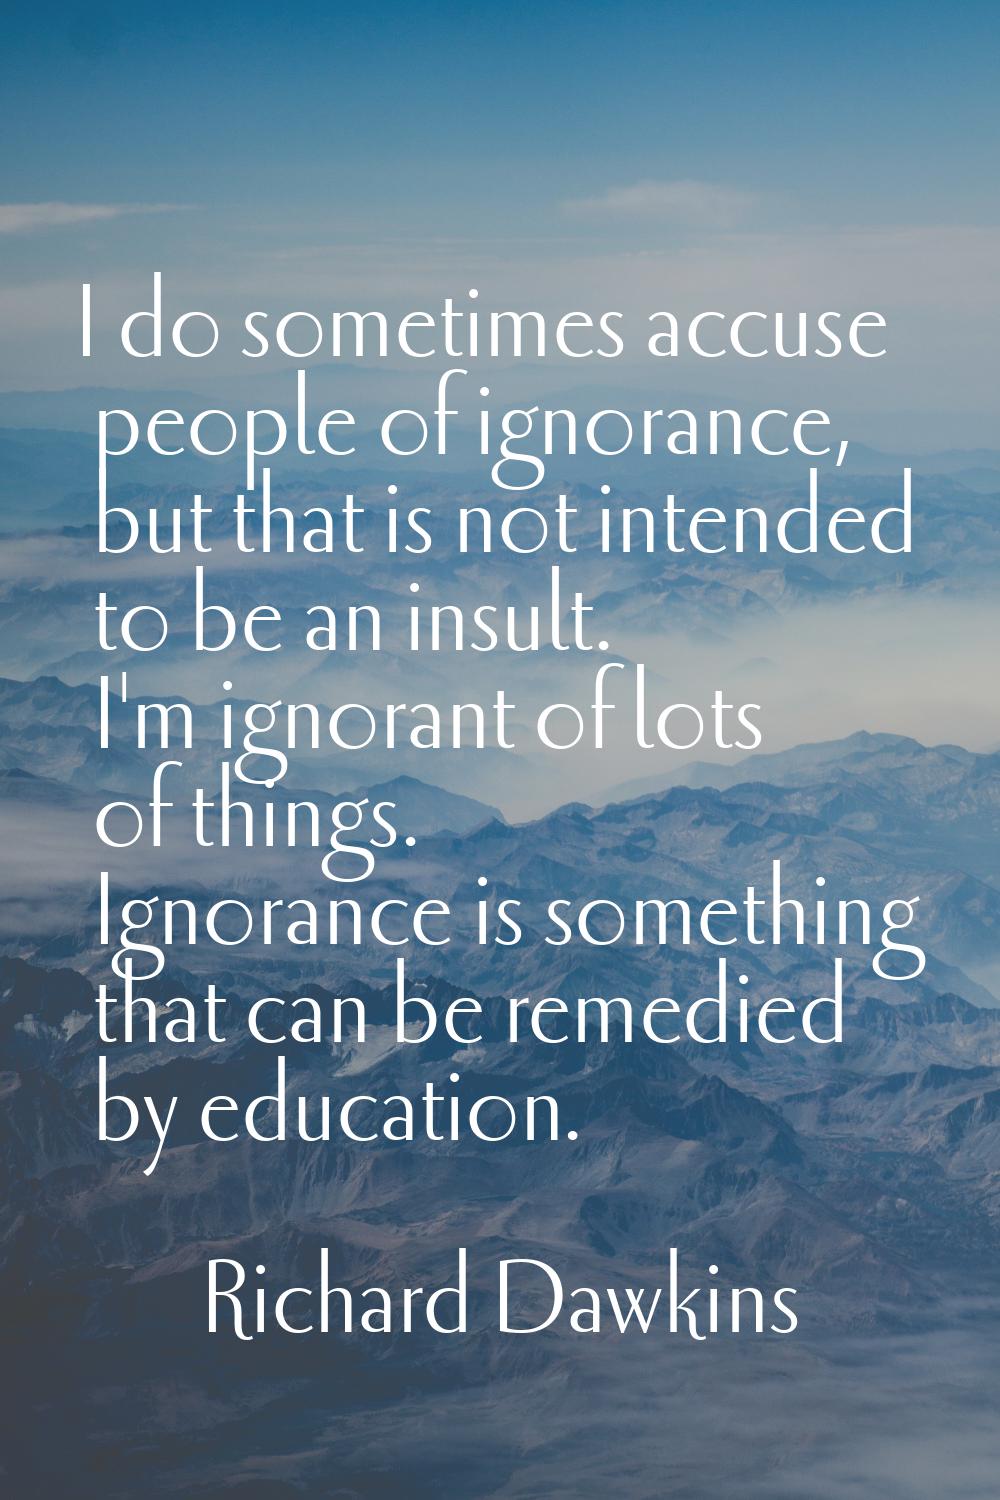 I do sometimes accuse people of ignorance, but that is not intended to be an insult. I'm ignorant o